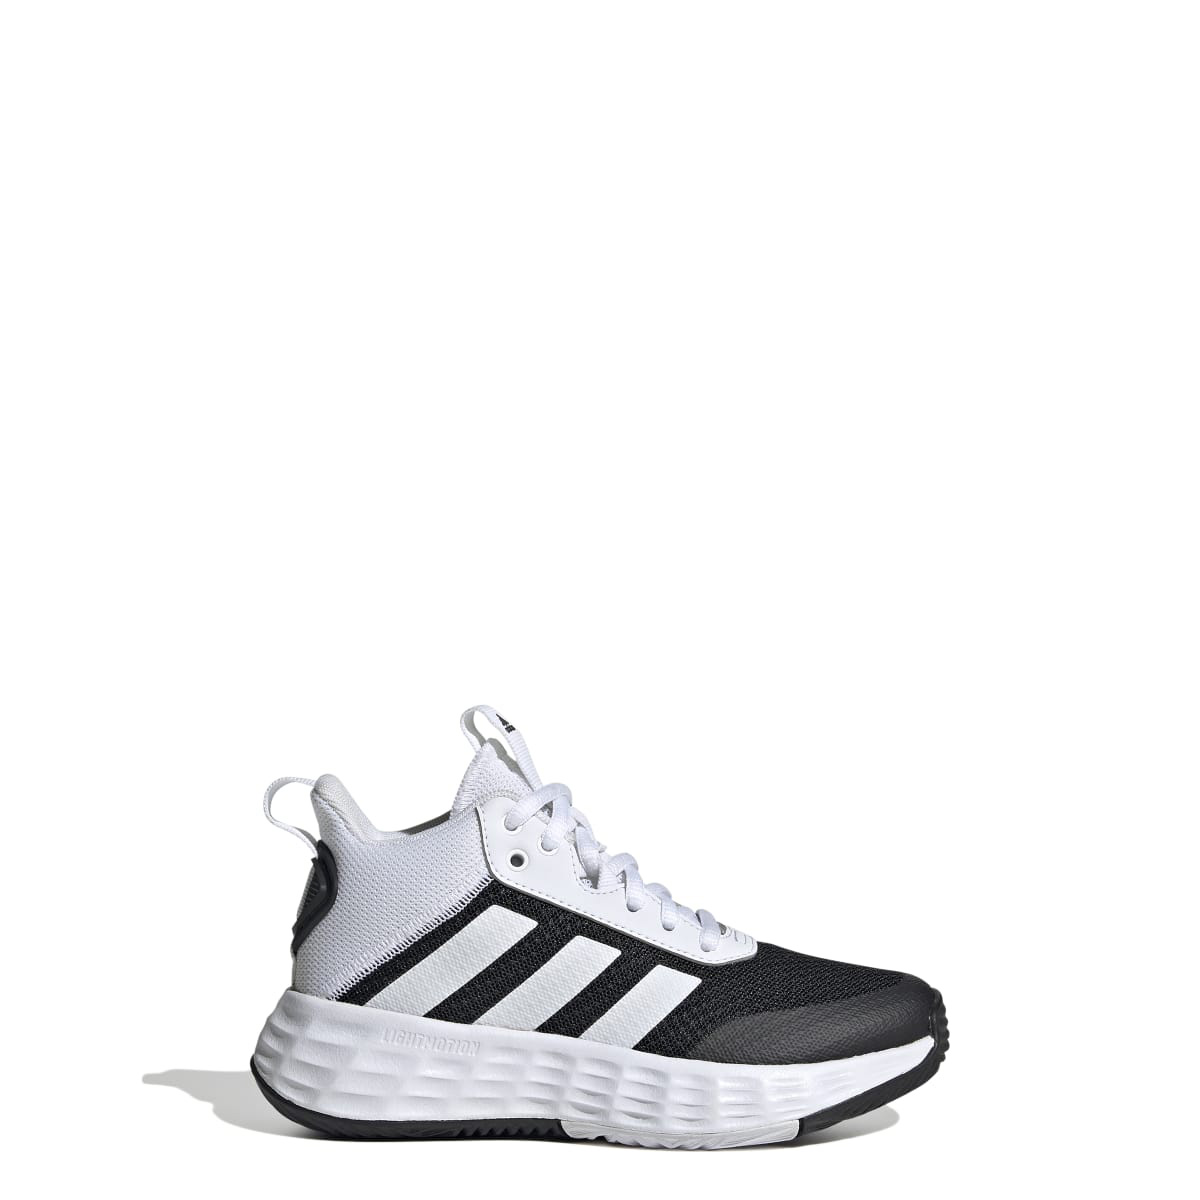 Youth adidas Ownthegame 2.0 School Basketball Shoes Grade